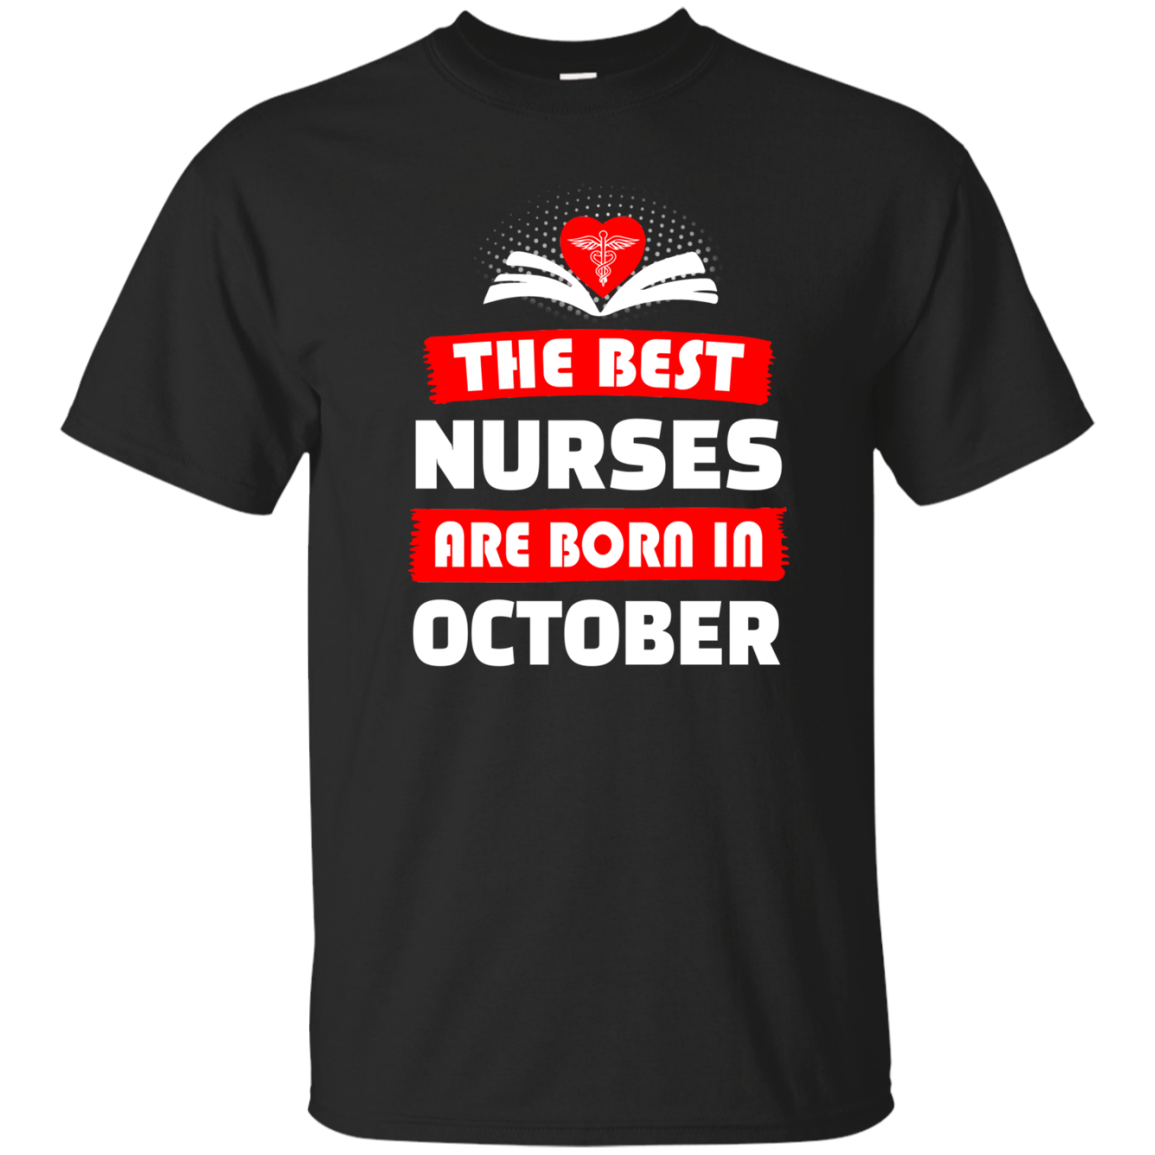 The best Nurses are born in October shirt, hoodie, tank